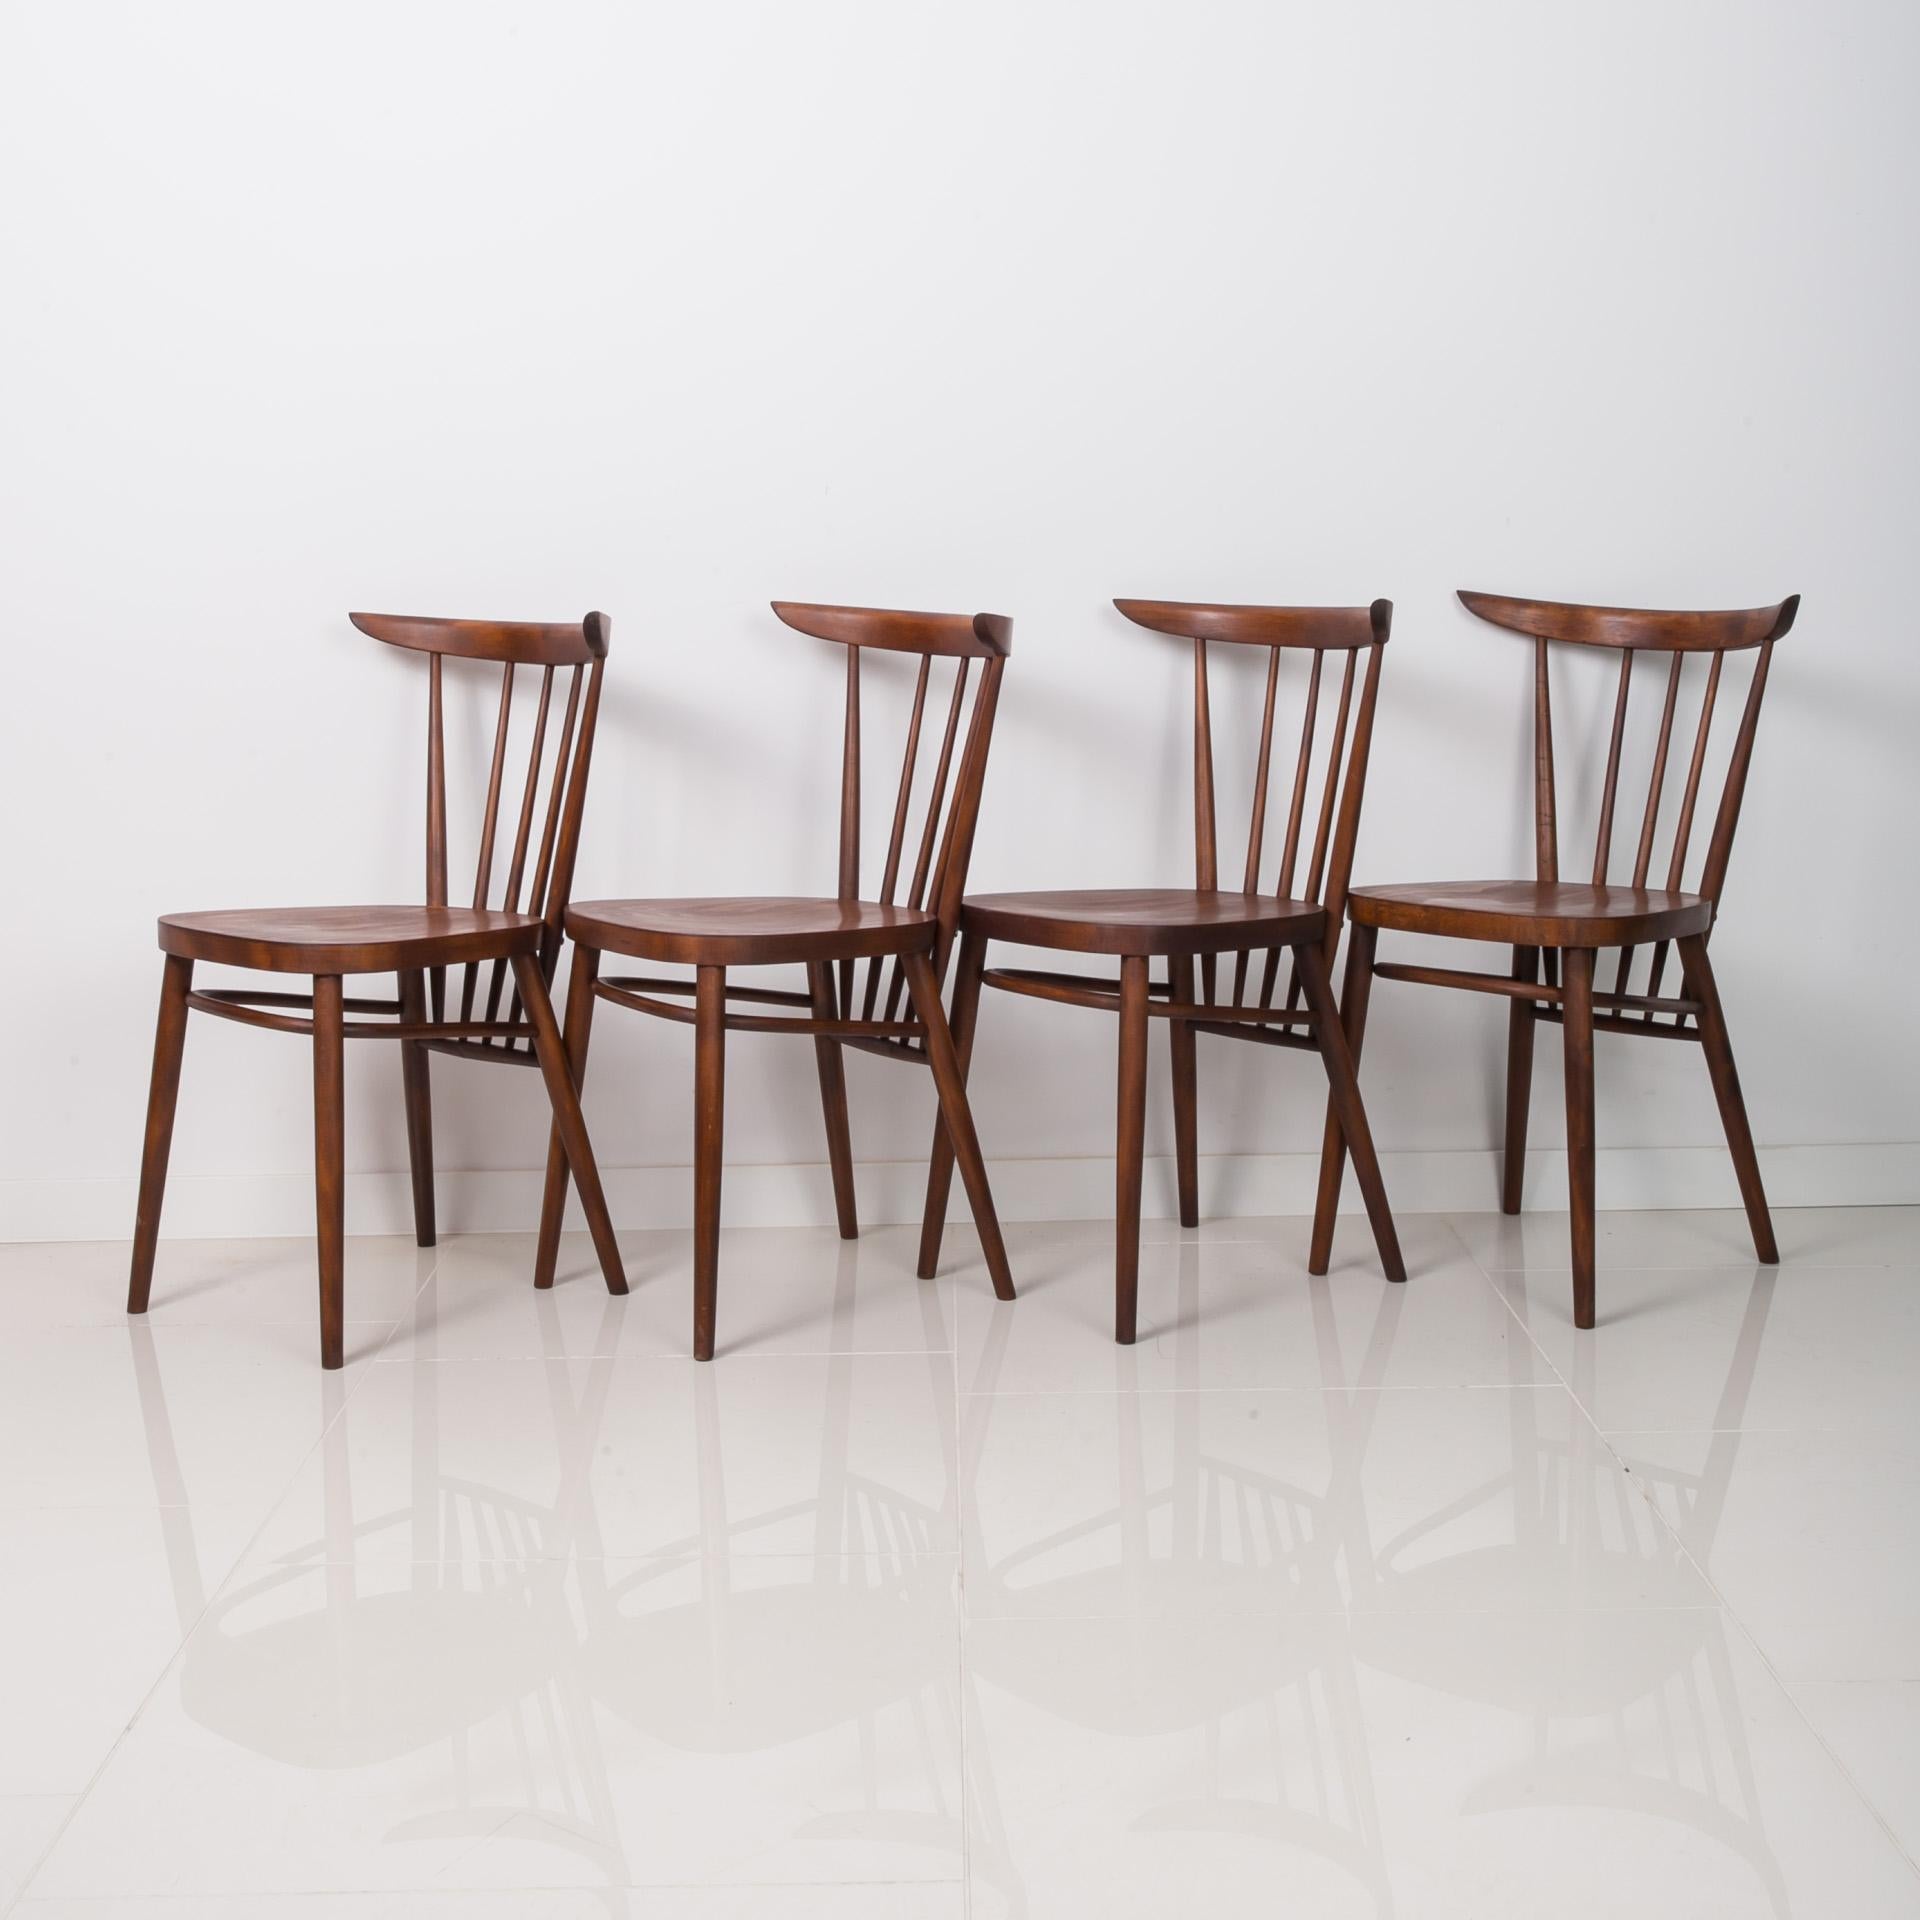 This set of four vintage dining chairs was designed by Czech designer František Jirak in the 1960s and produced by Tatra Nabytok. They are made of beech wood. The chairs have been completely restored finished with high-quality oil that gave them